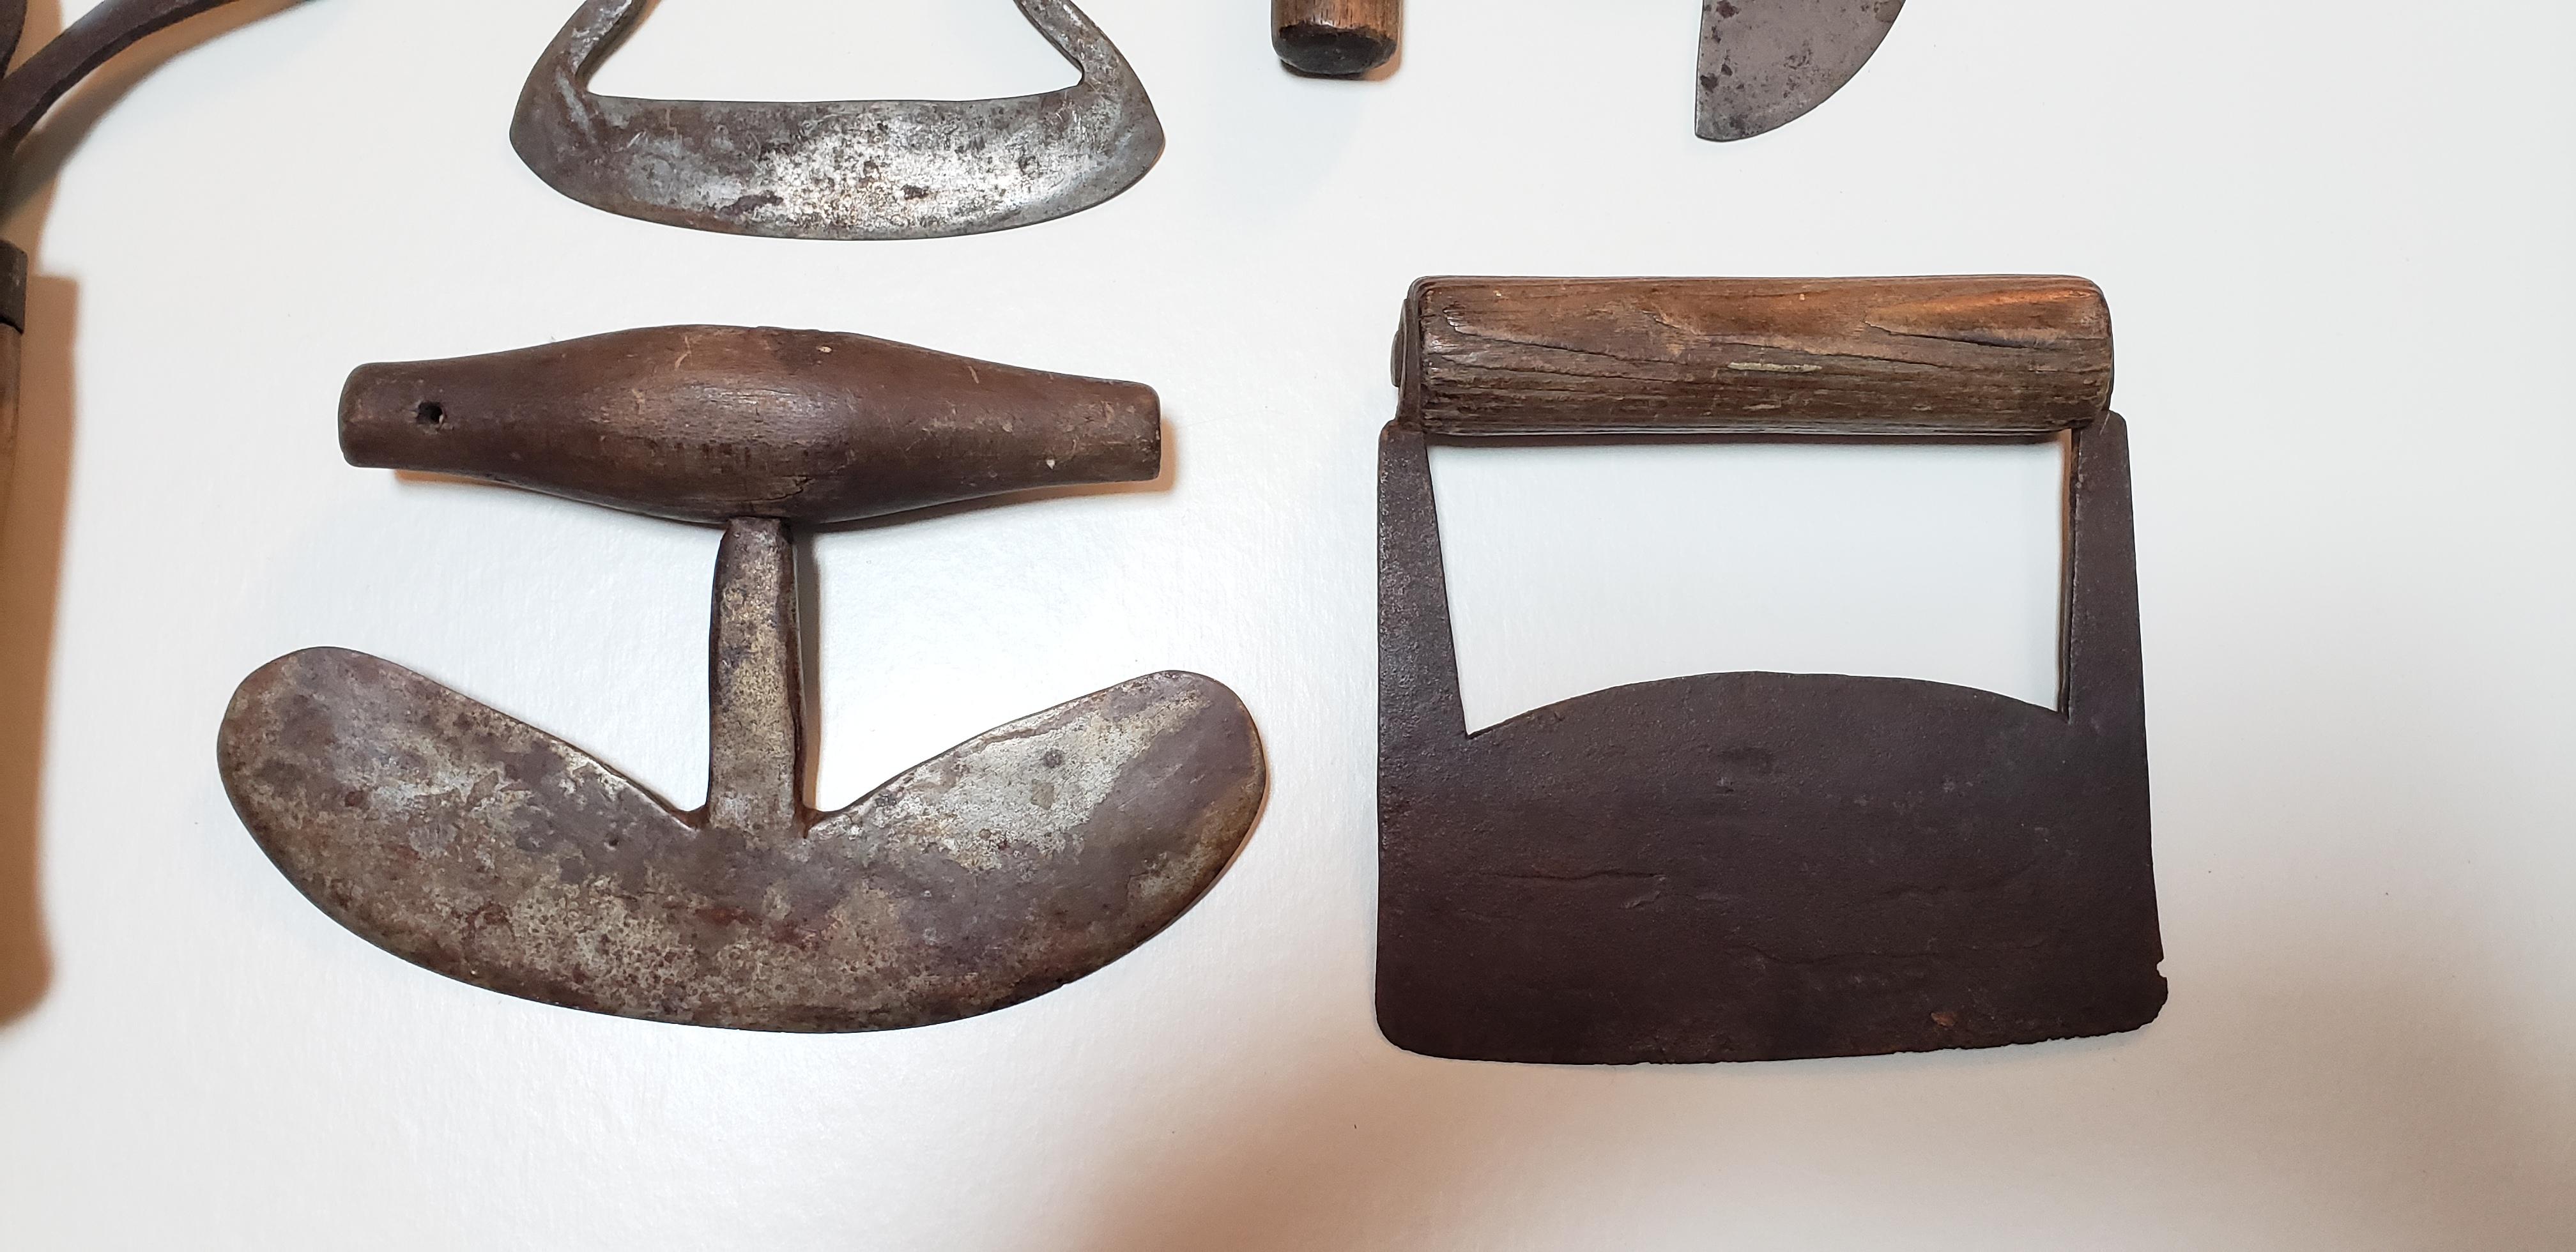 This small collection of blacksmith-made food chopper has been hanging on the kitchen wall for over 40 years. These were collected on the East-End of Long Island and represent the creative eye of each craftsman who formed the iron and turned or